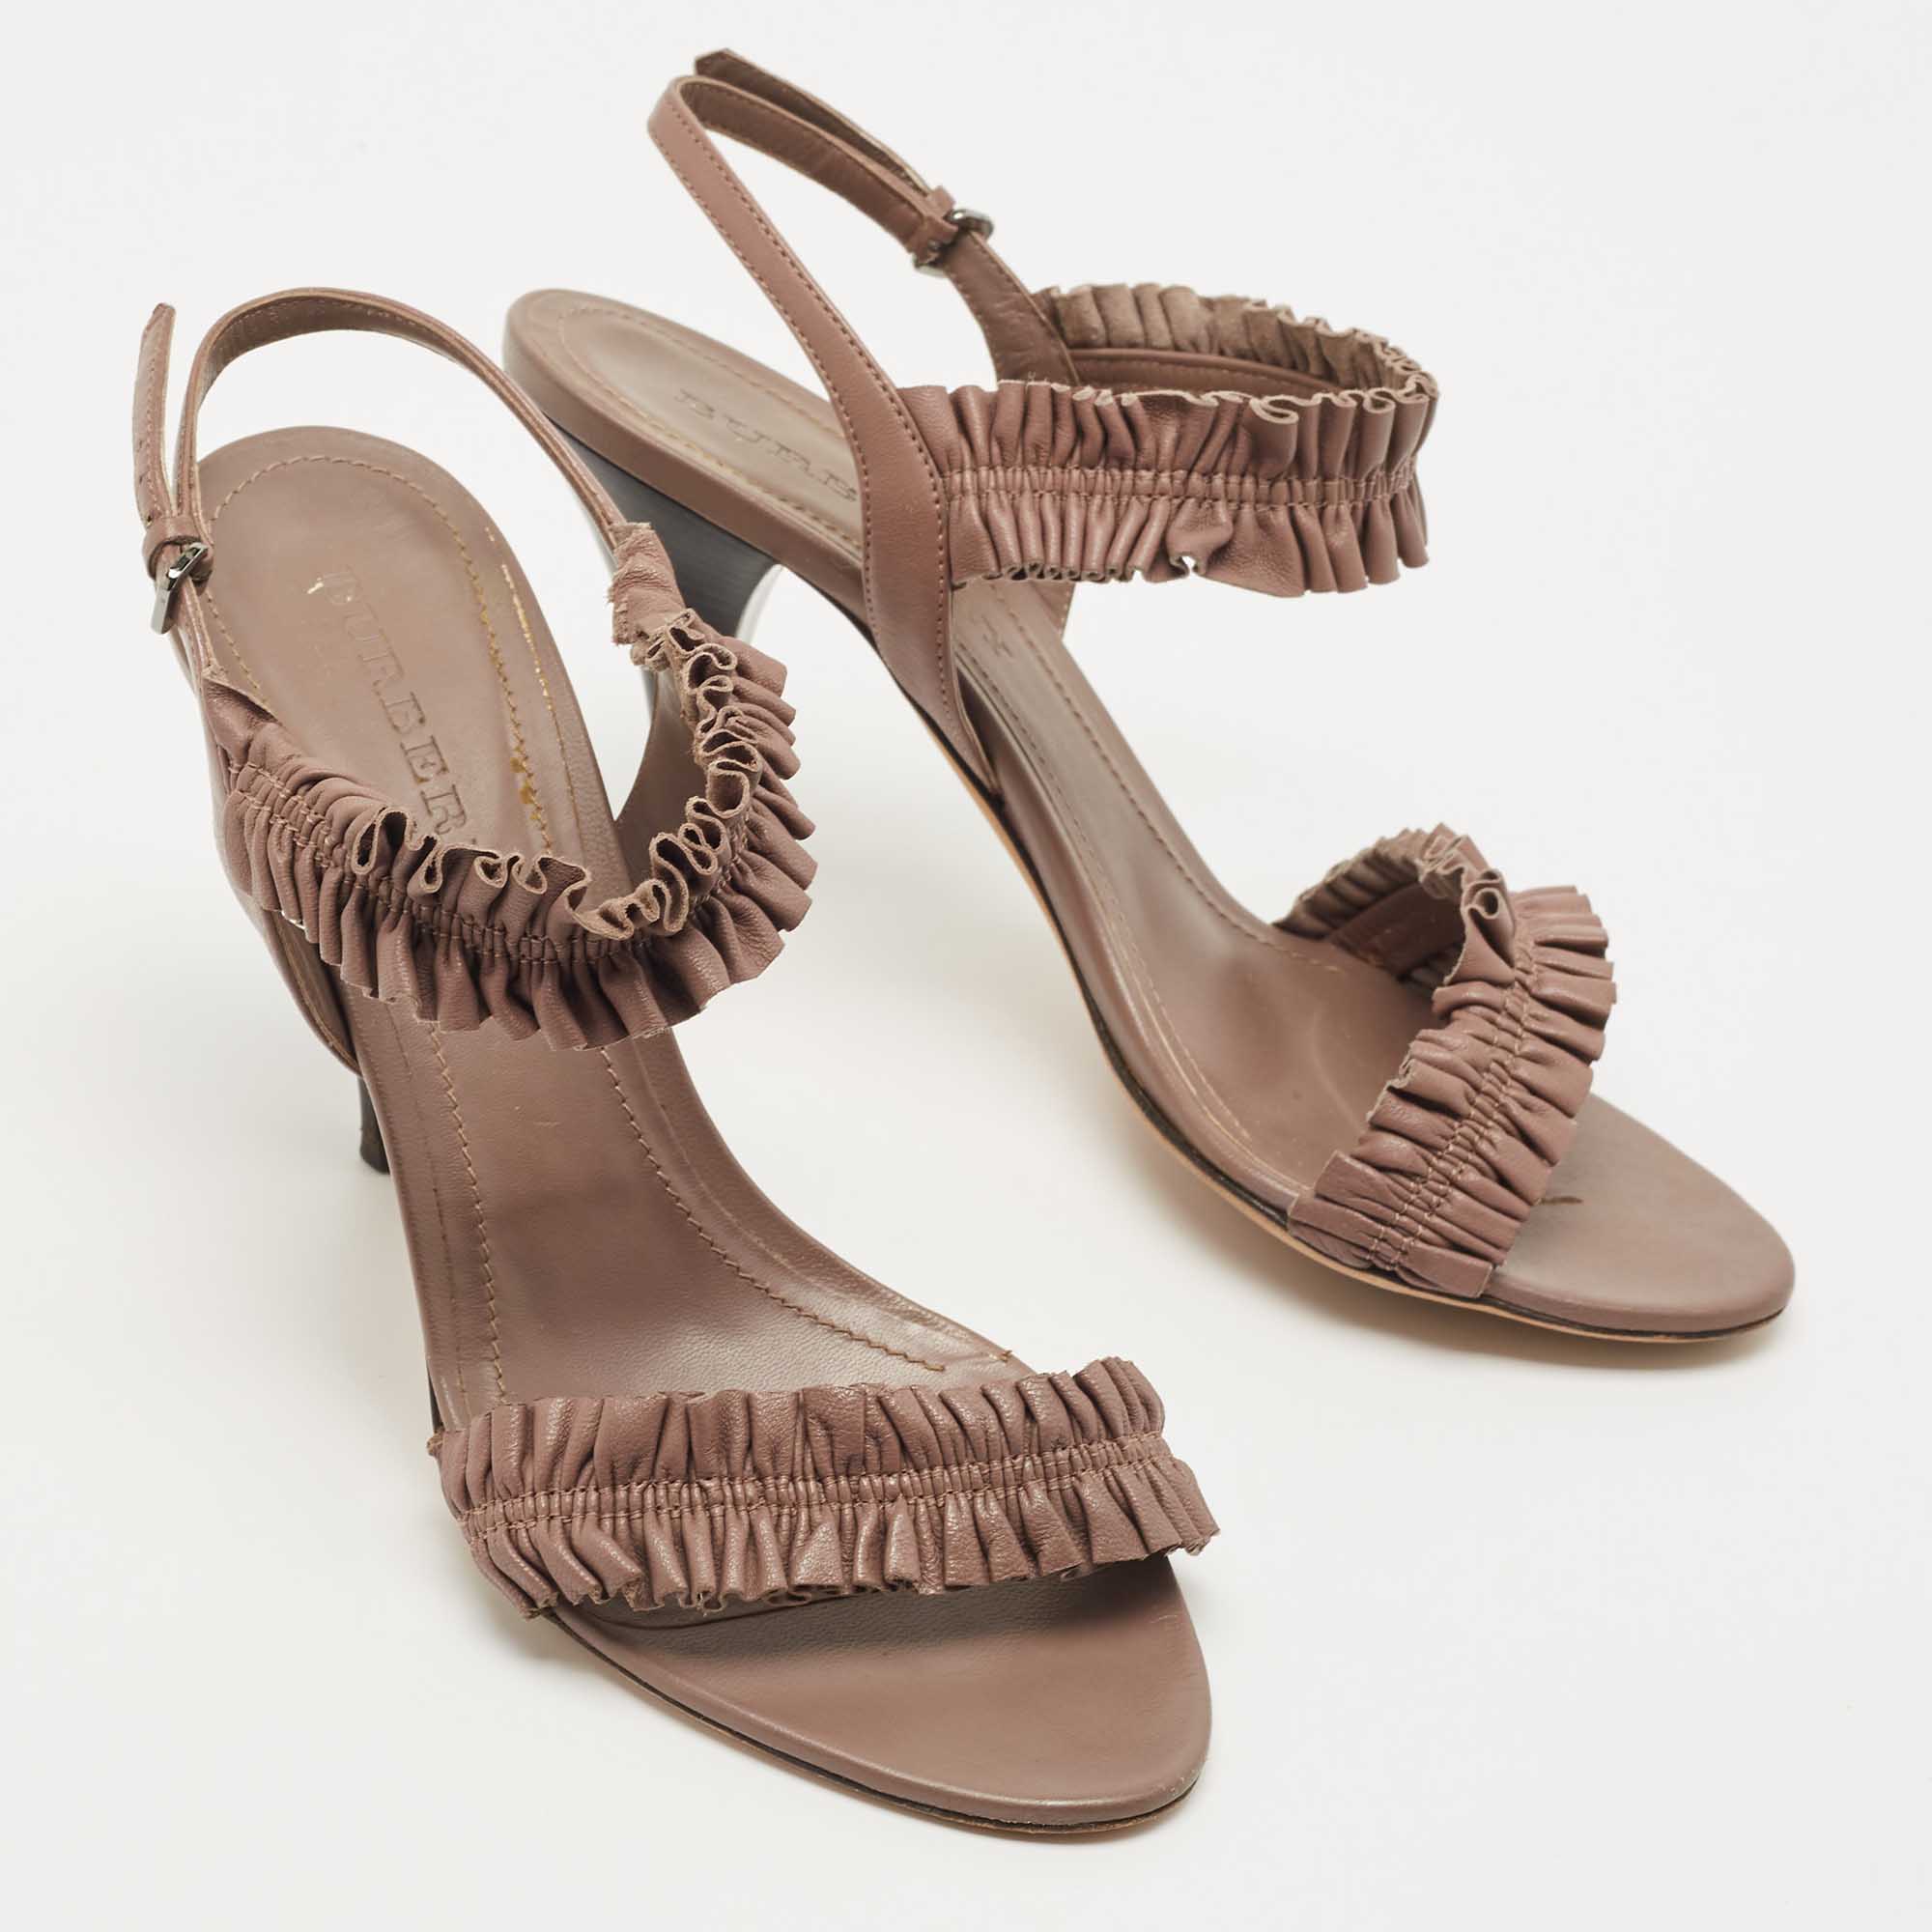 Burberry Brown Leather Ruffle Ankle Strap Sandals Size 39